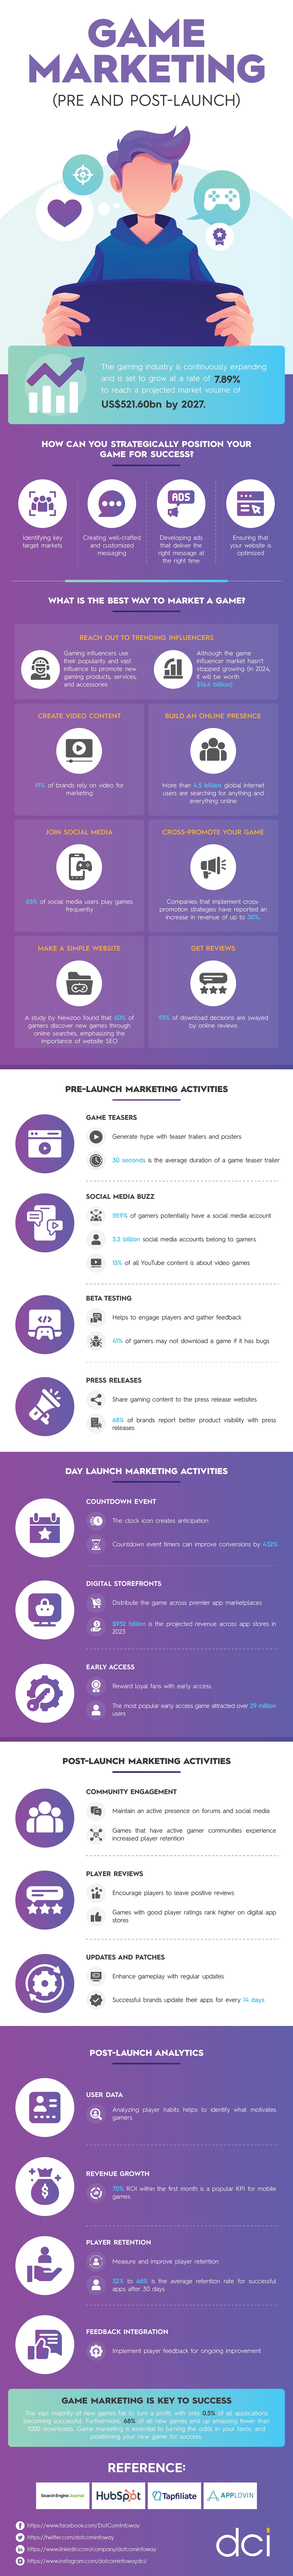 game marketing guide pre and post launch strategies